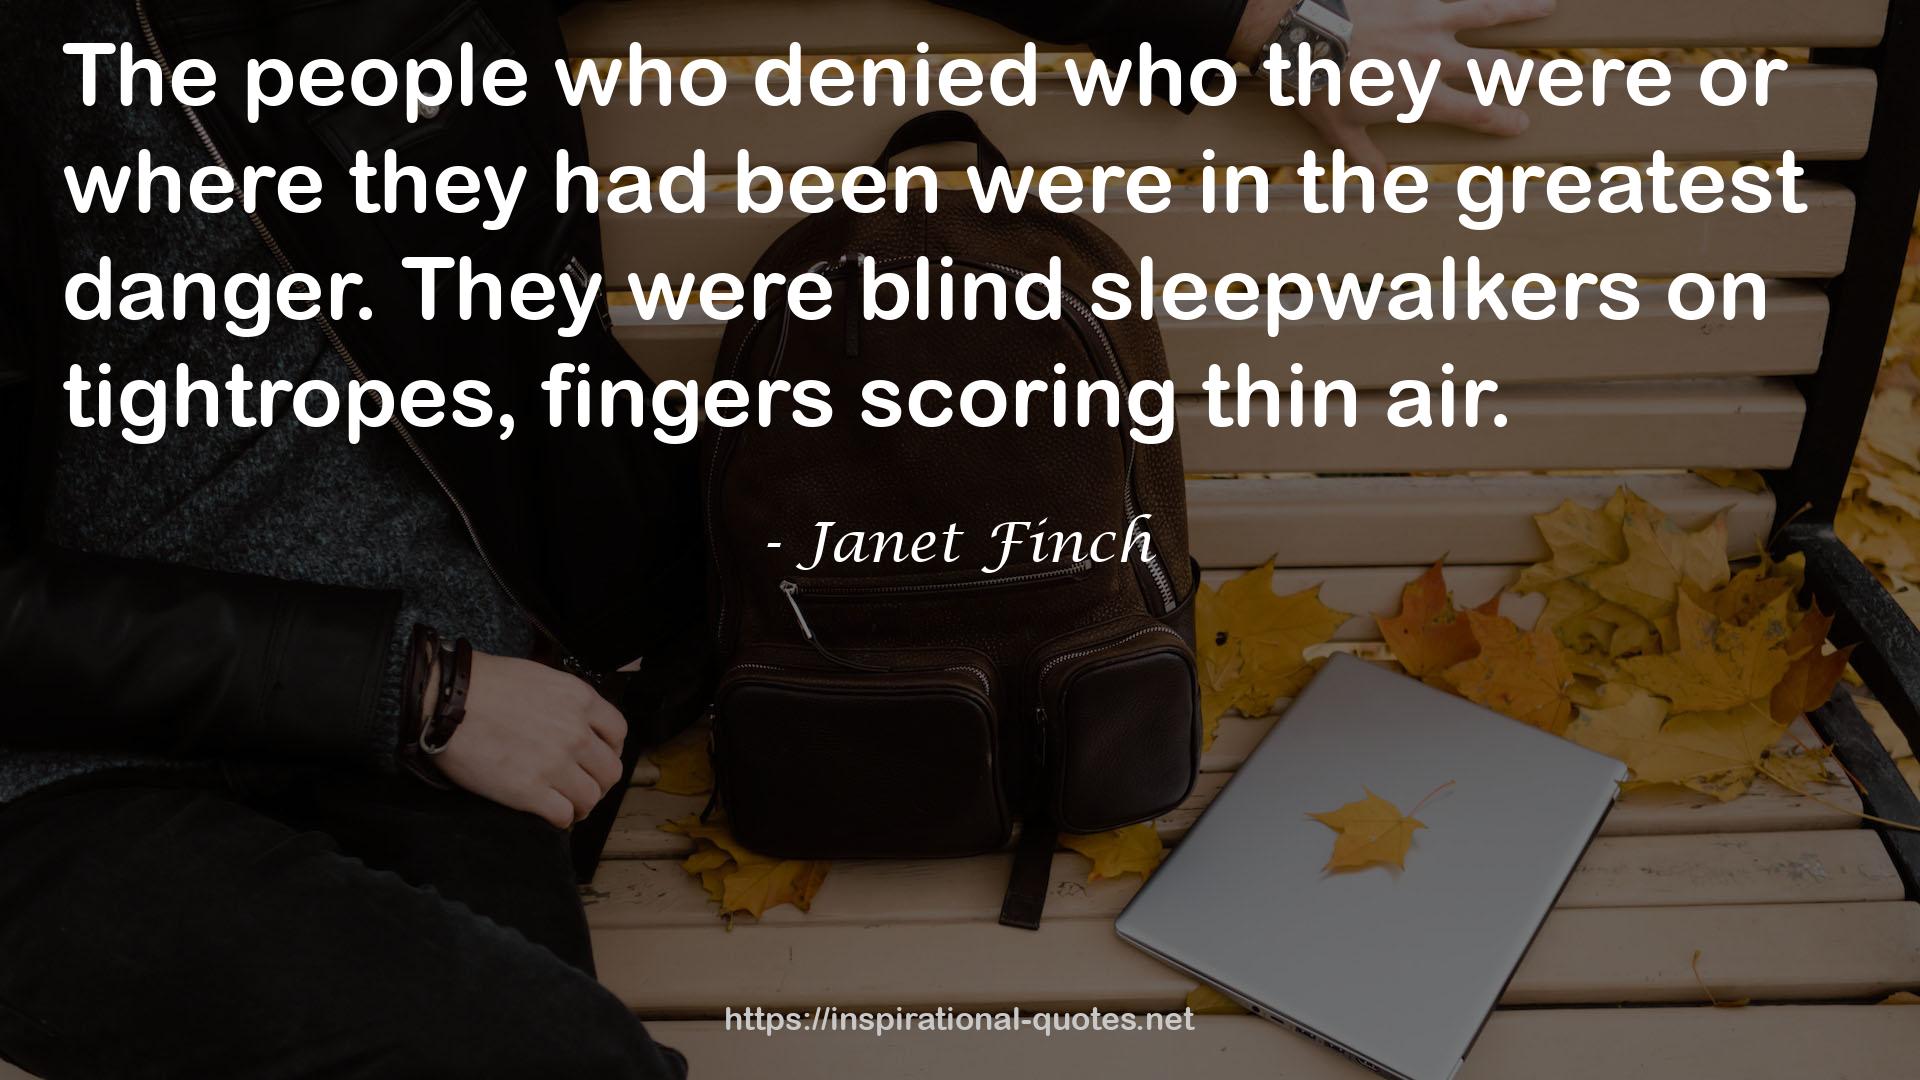 Janet Finch QUOTES